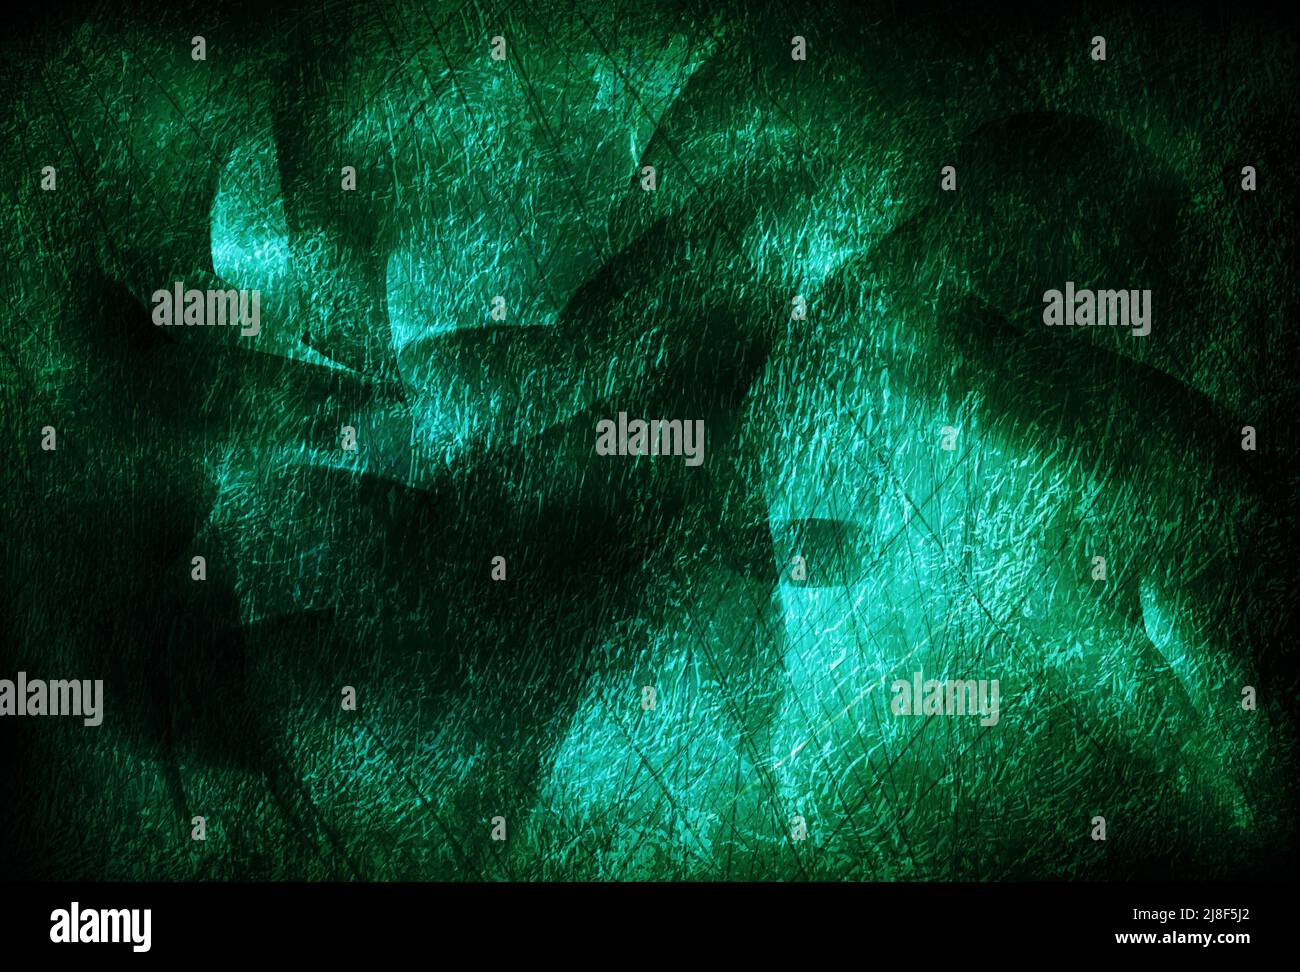 Green storm. Abstract background in green tones on the marine theme. Illustration Stock Photo